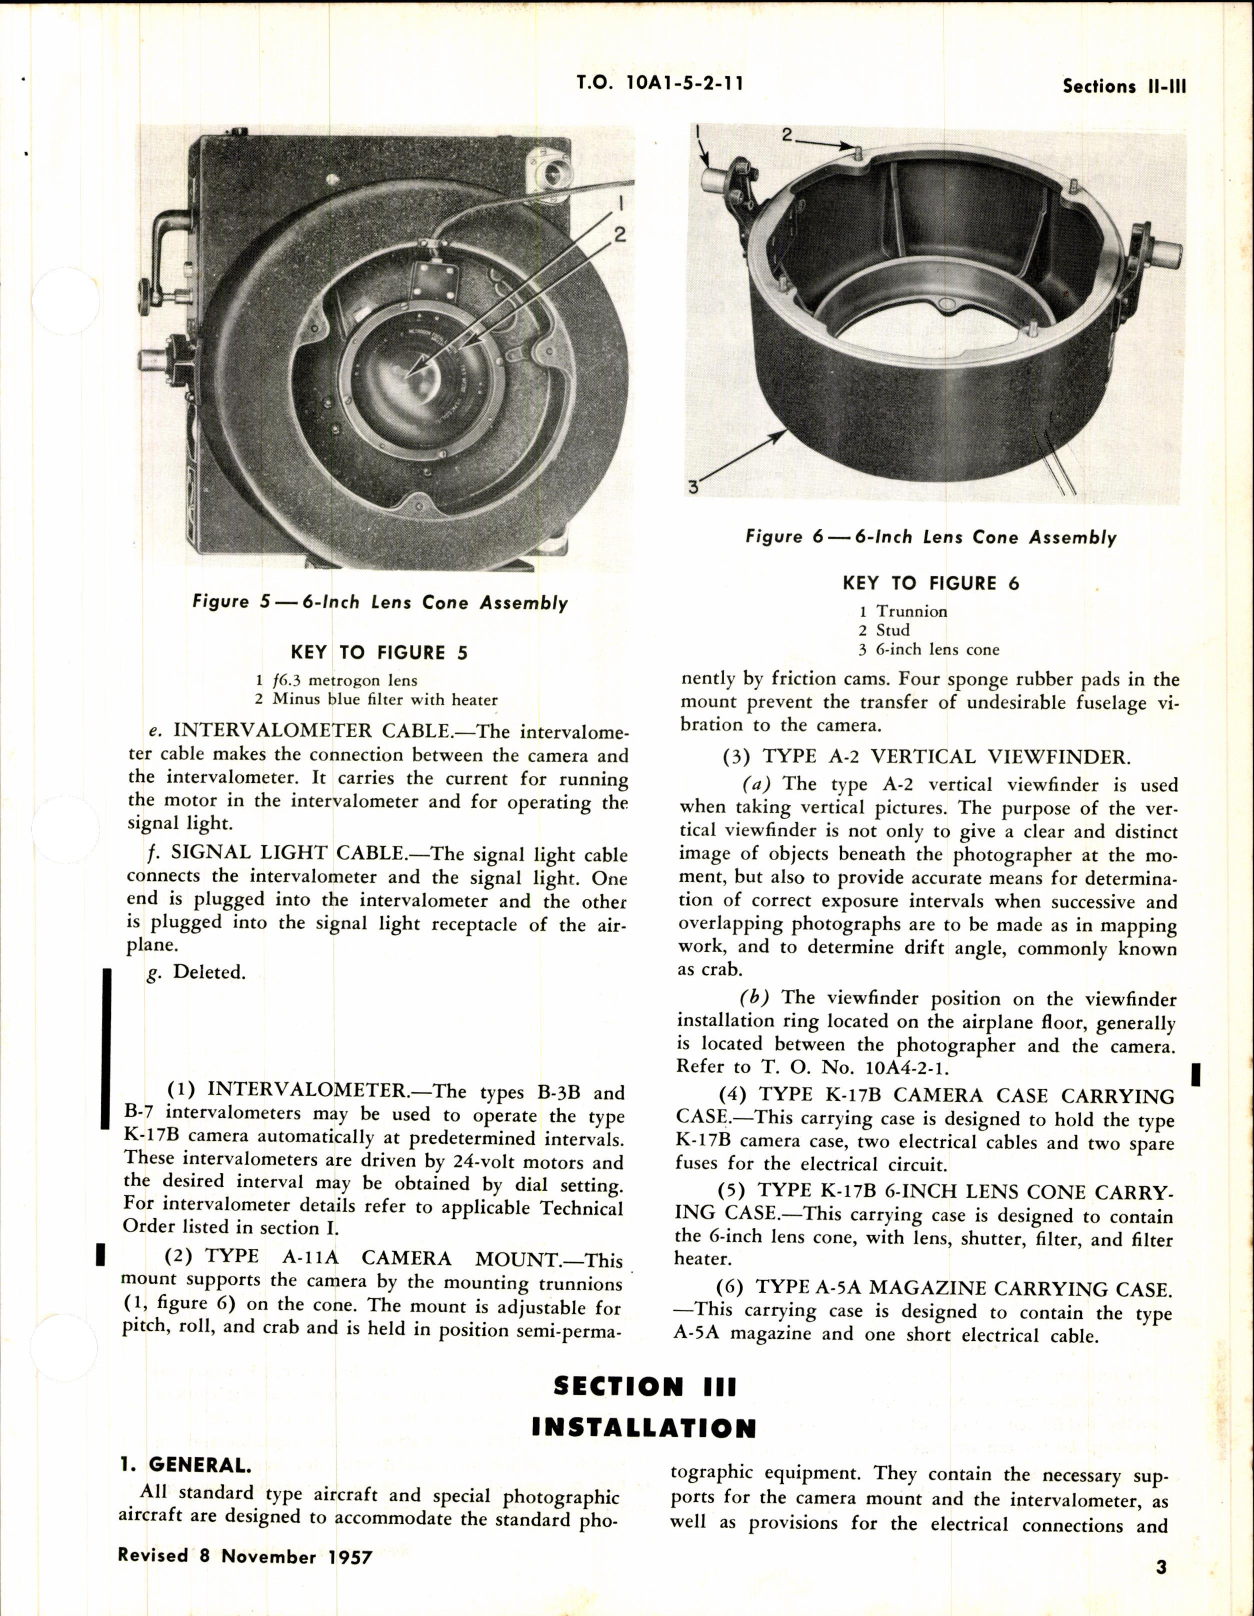 Sample page 5 from AirCorps Library document: Operation, Service, and Overhaul Instructions with Parts Catalog for Aircraft Camera Type K-17B 